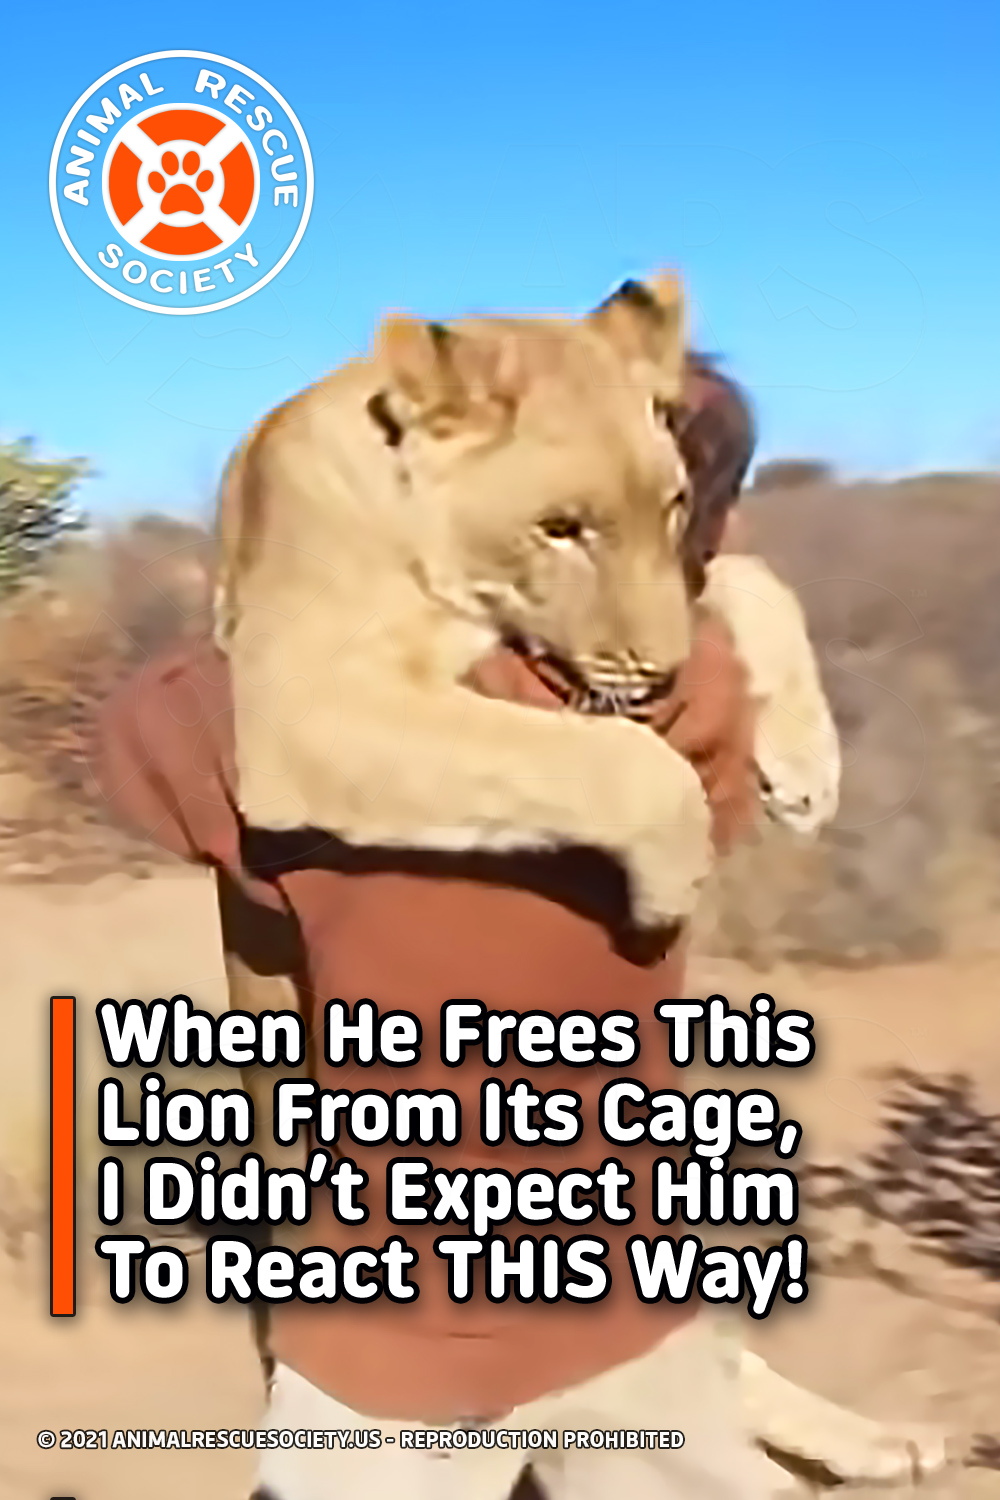 When He Frees This Lion From Its Cage, I Didn’t Expect Him To React THIS Way!